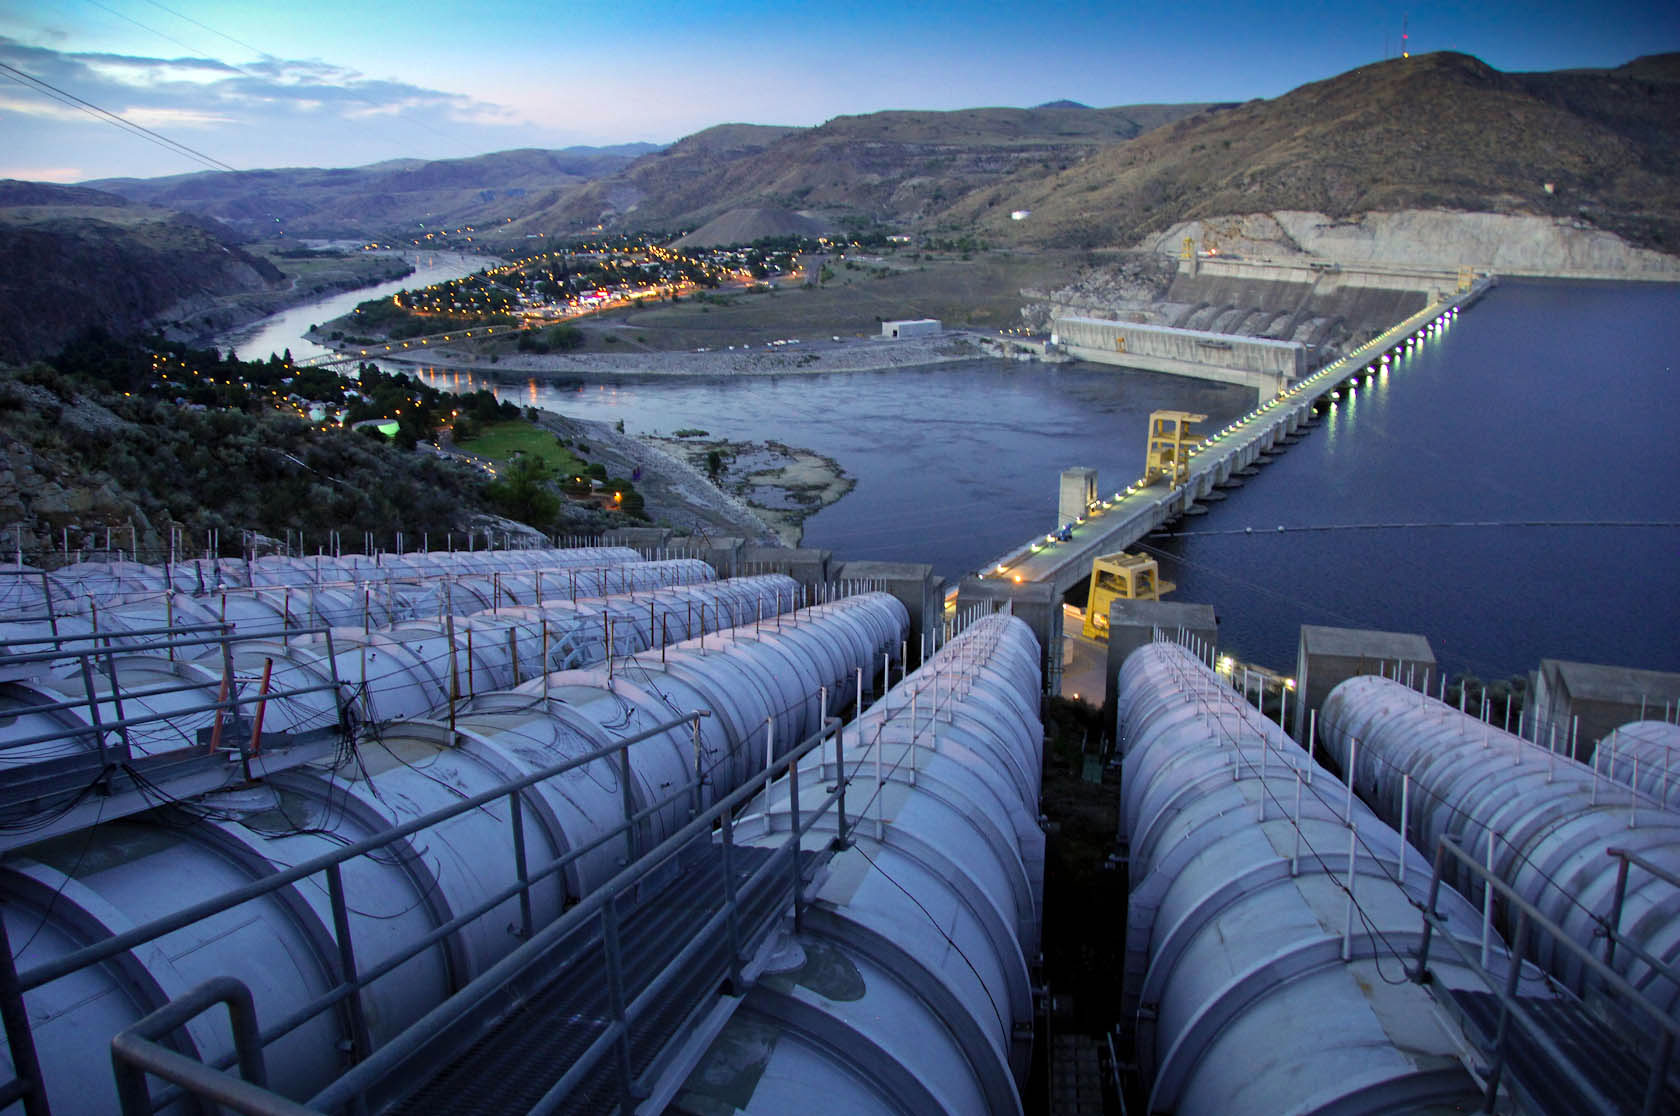 August 1, 2012. Exterior view of Grand Coulee dam and forebay from above the John Keys Pump Generation Plant intakes.